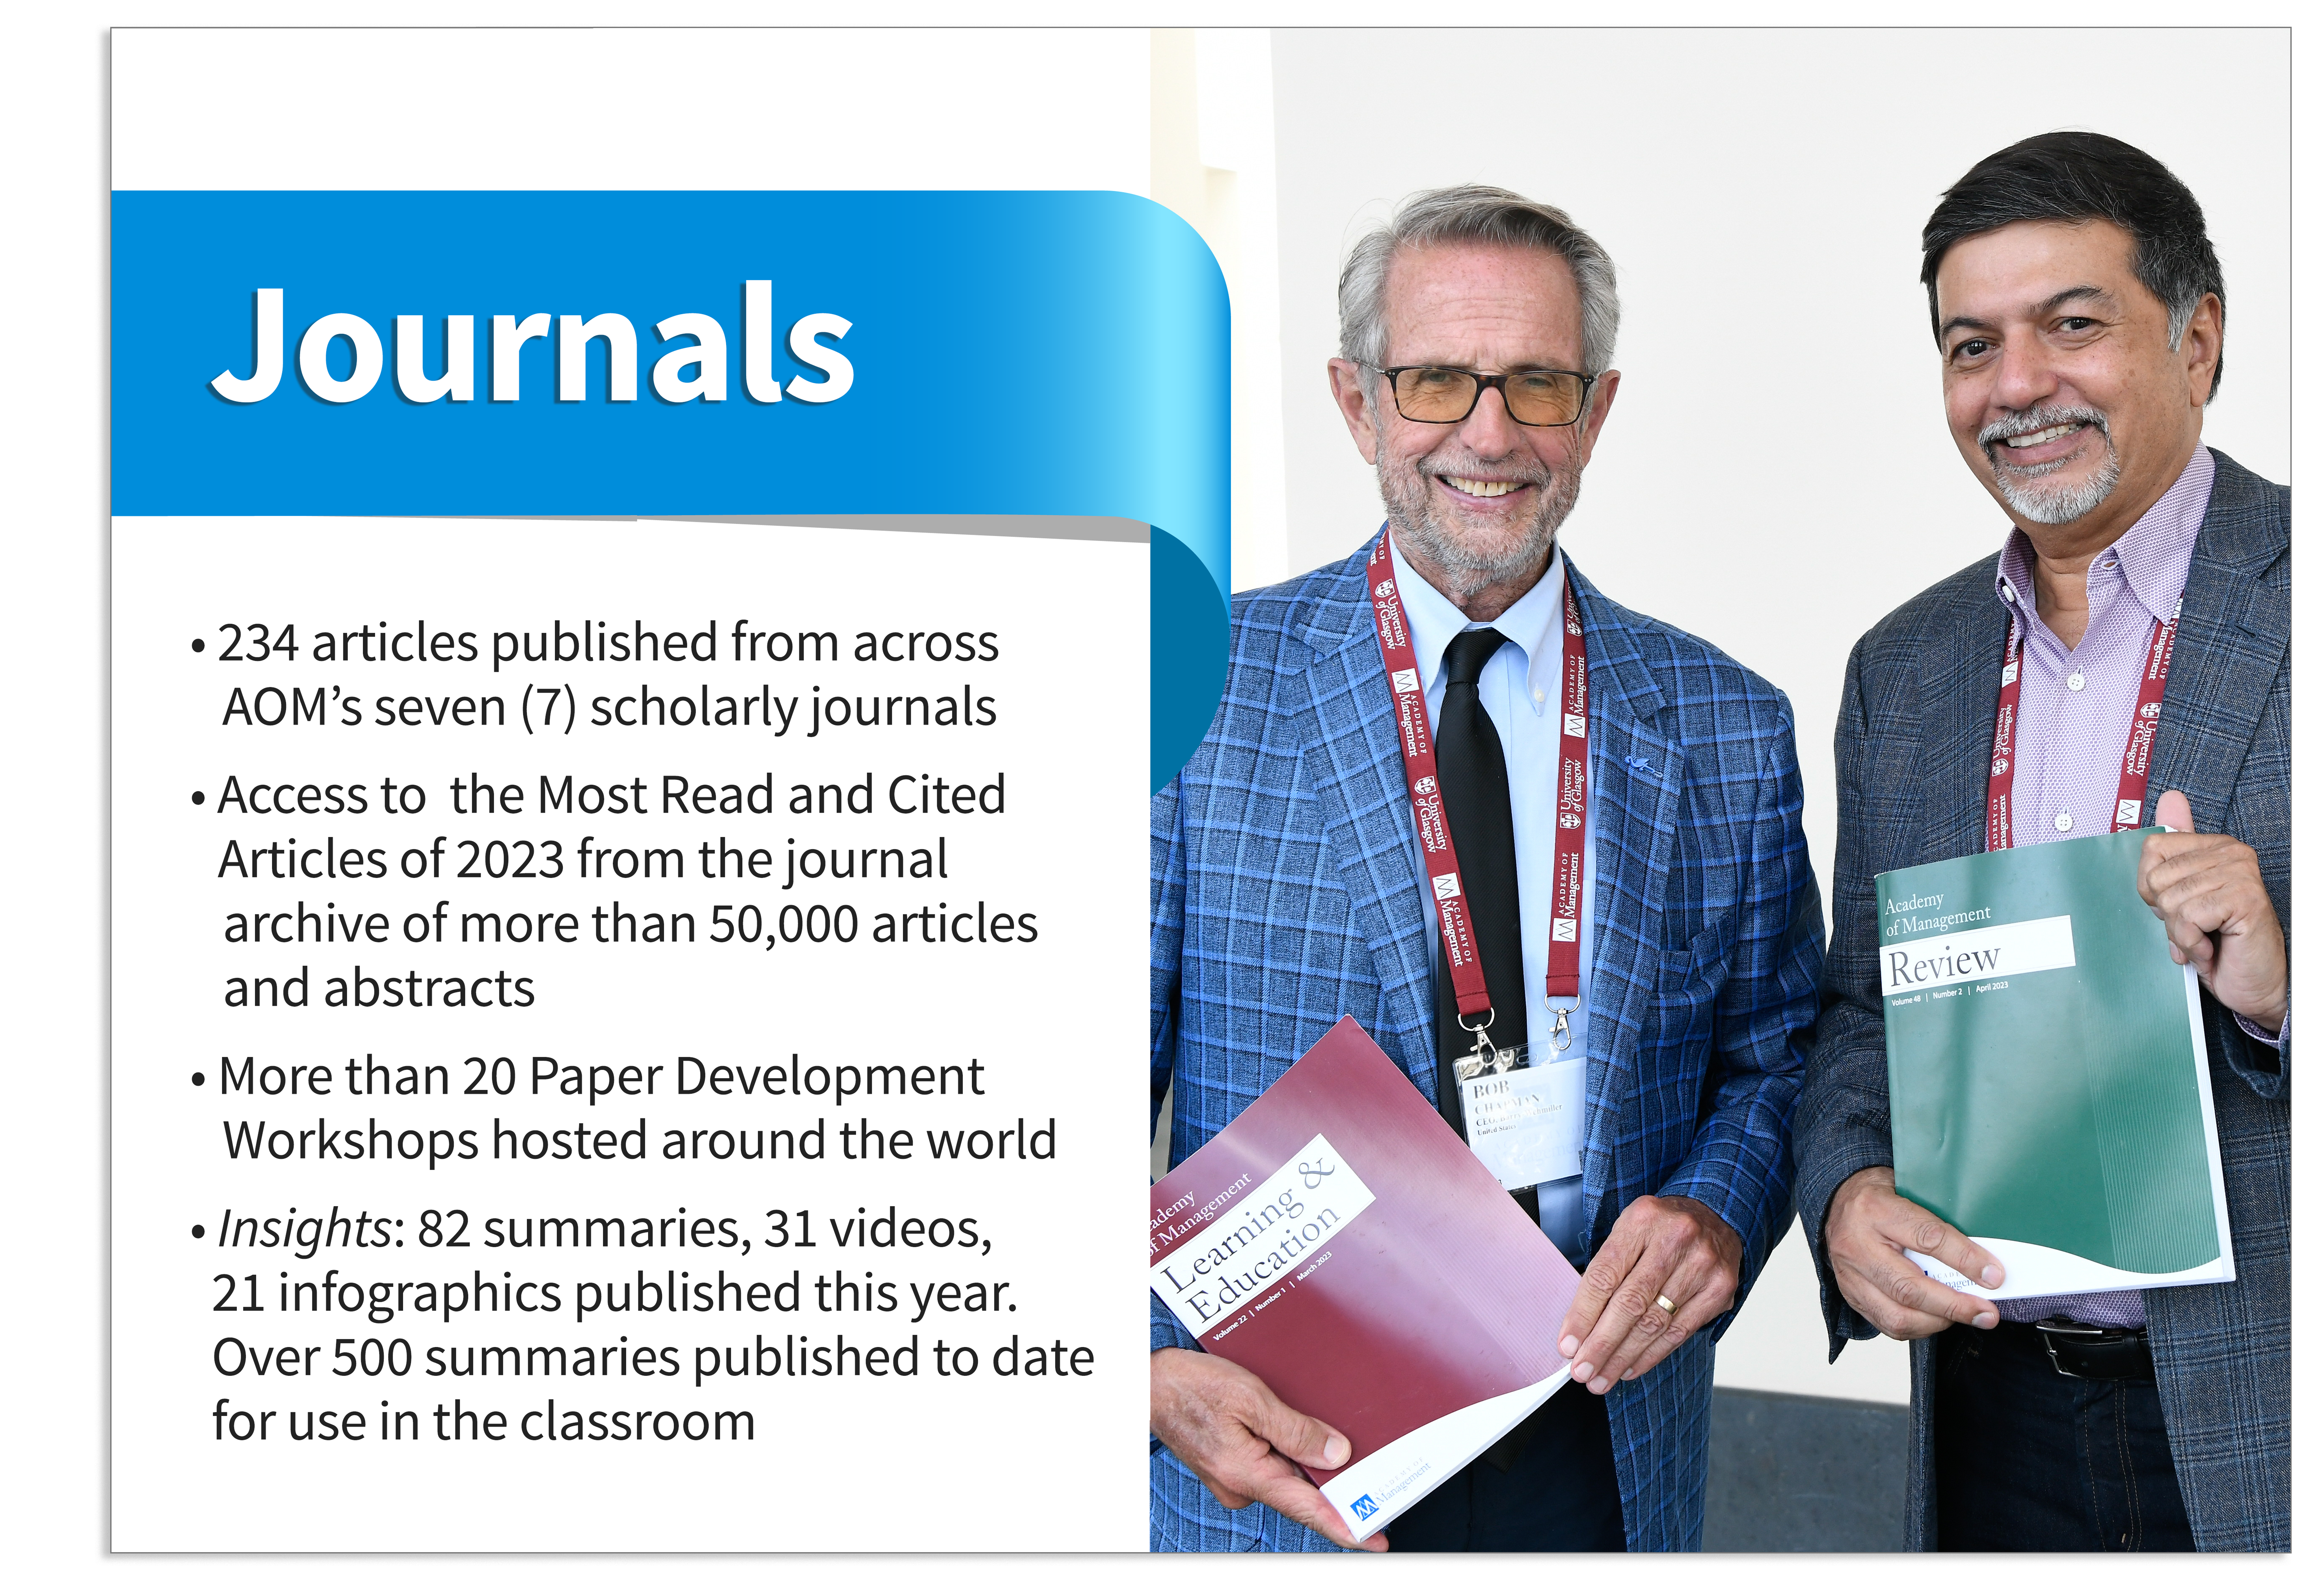 Members holding AMLE and AMR journals